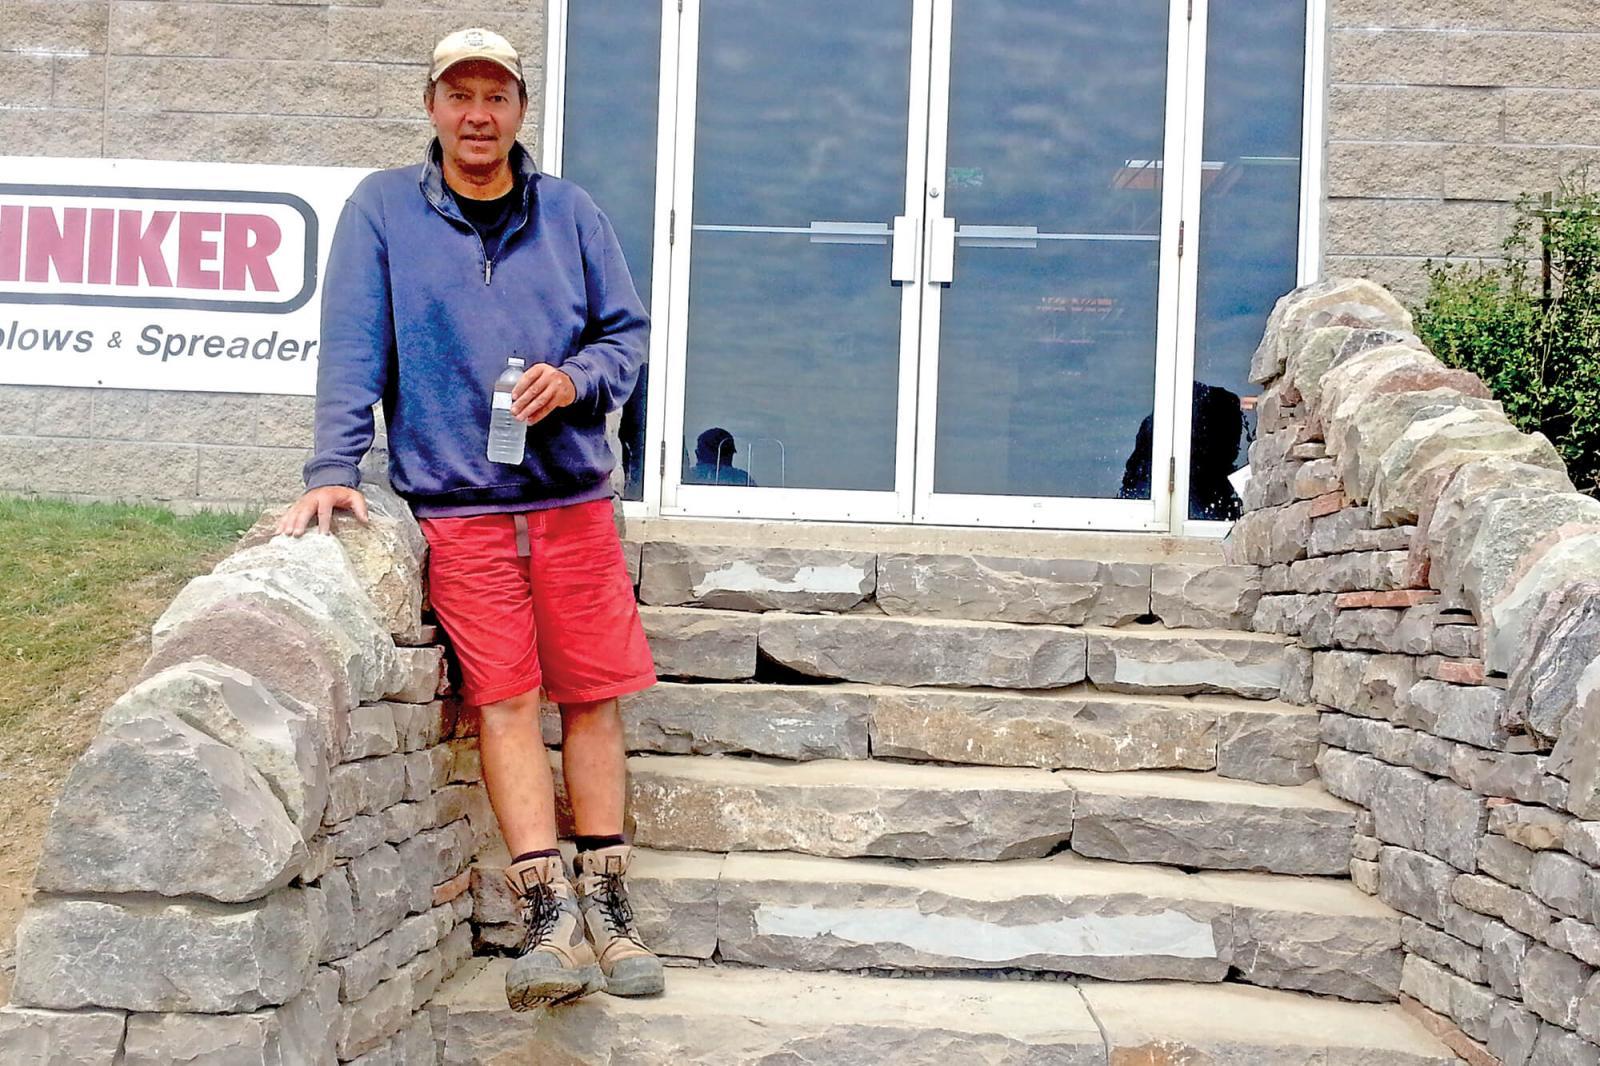 Dean McClellan and a crew from the Saugeen Shores First Nations did an amazing job at building the dry stone steps at LO home office at the entrance to Vanden Bussche Irrigation.